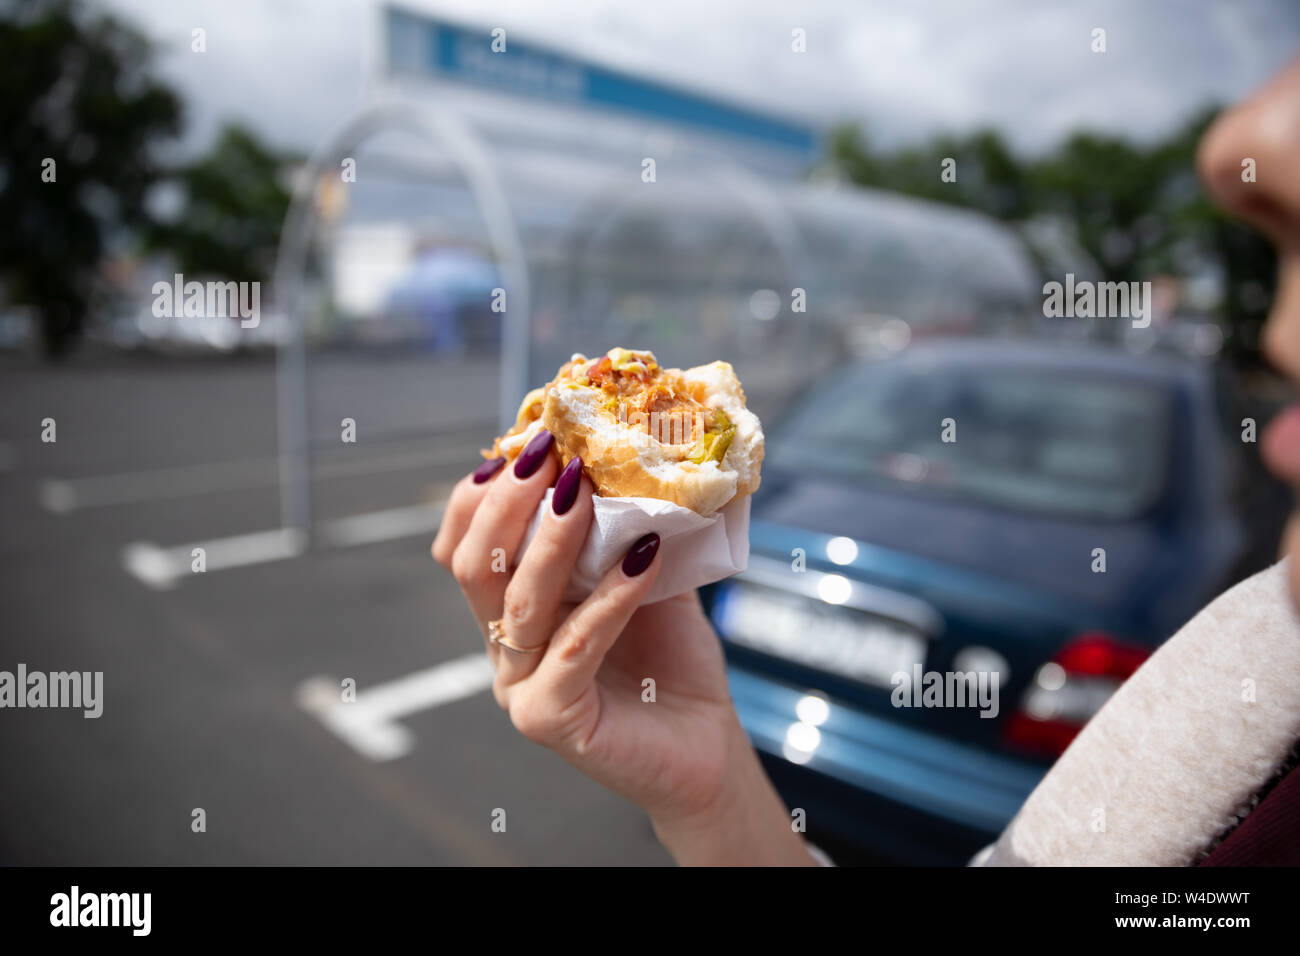 A young woman holds a bitten hot dog in her hand. Snack in the parking lot near the shopping center. Stock Photo